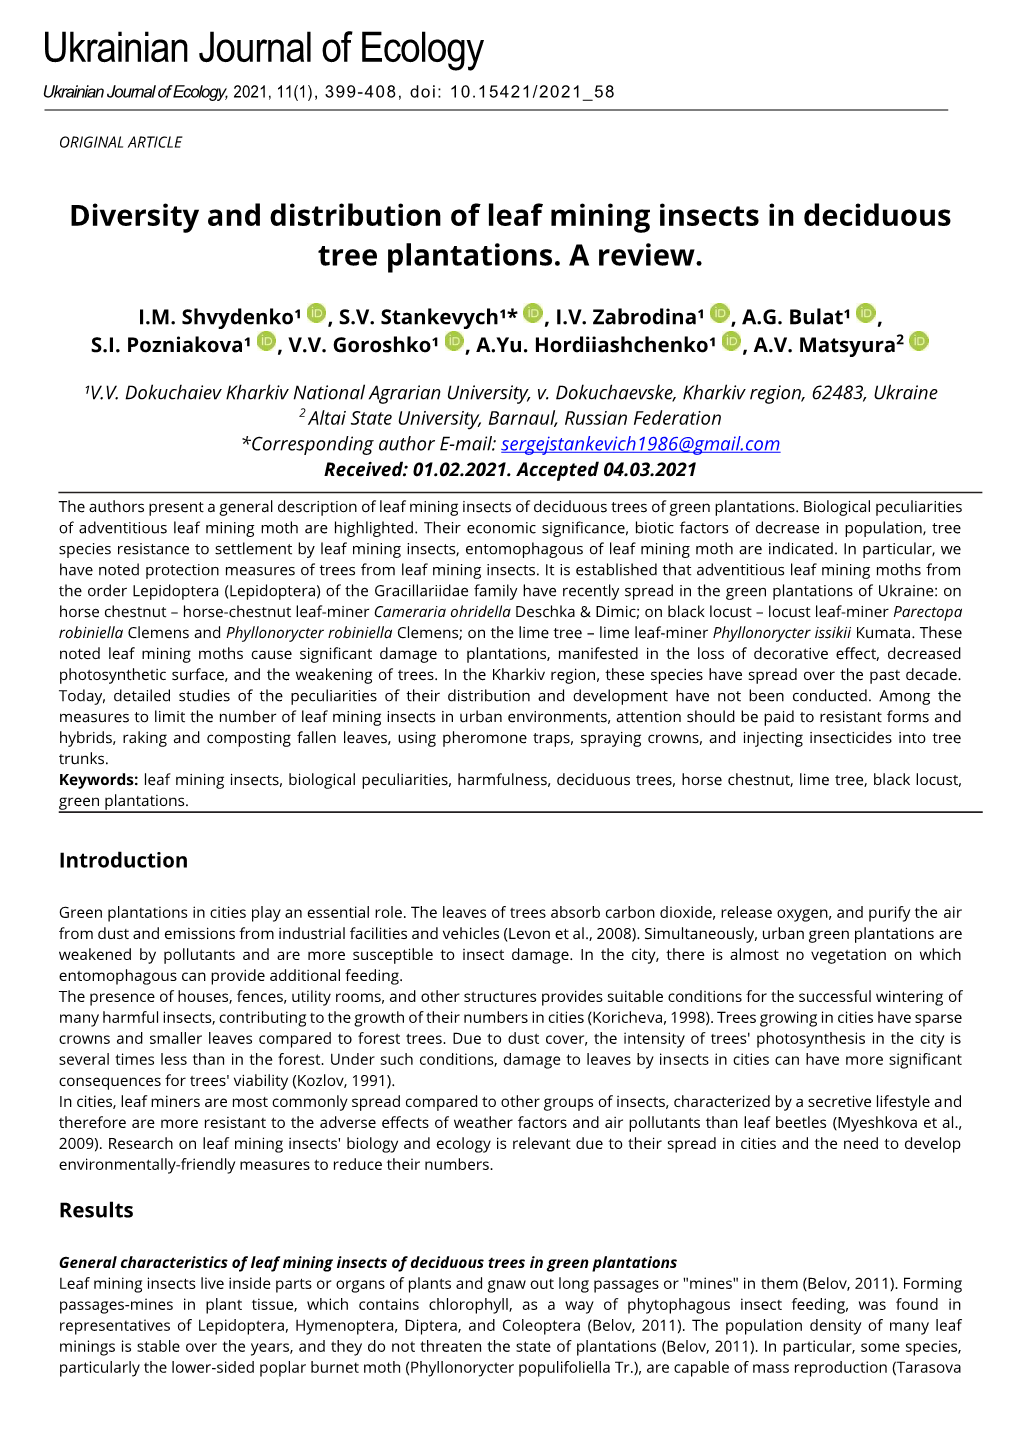 Diversity and Distribution of Leaf Mining Insects in Deciduous Tree Plantations